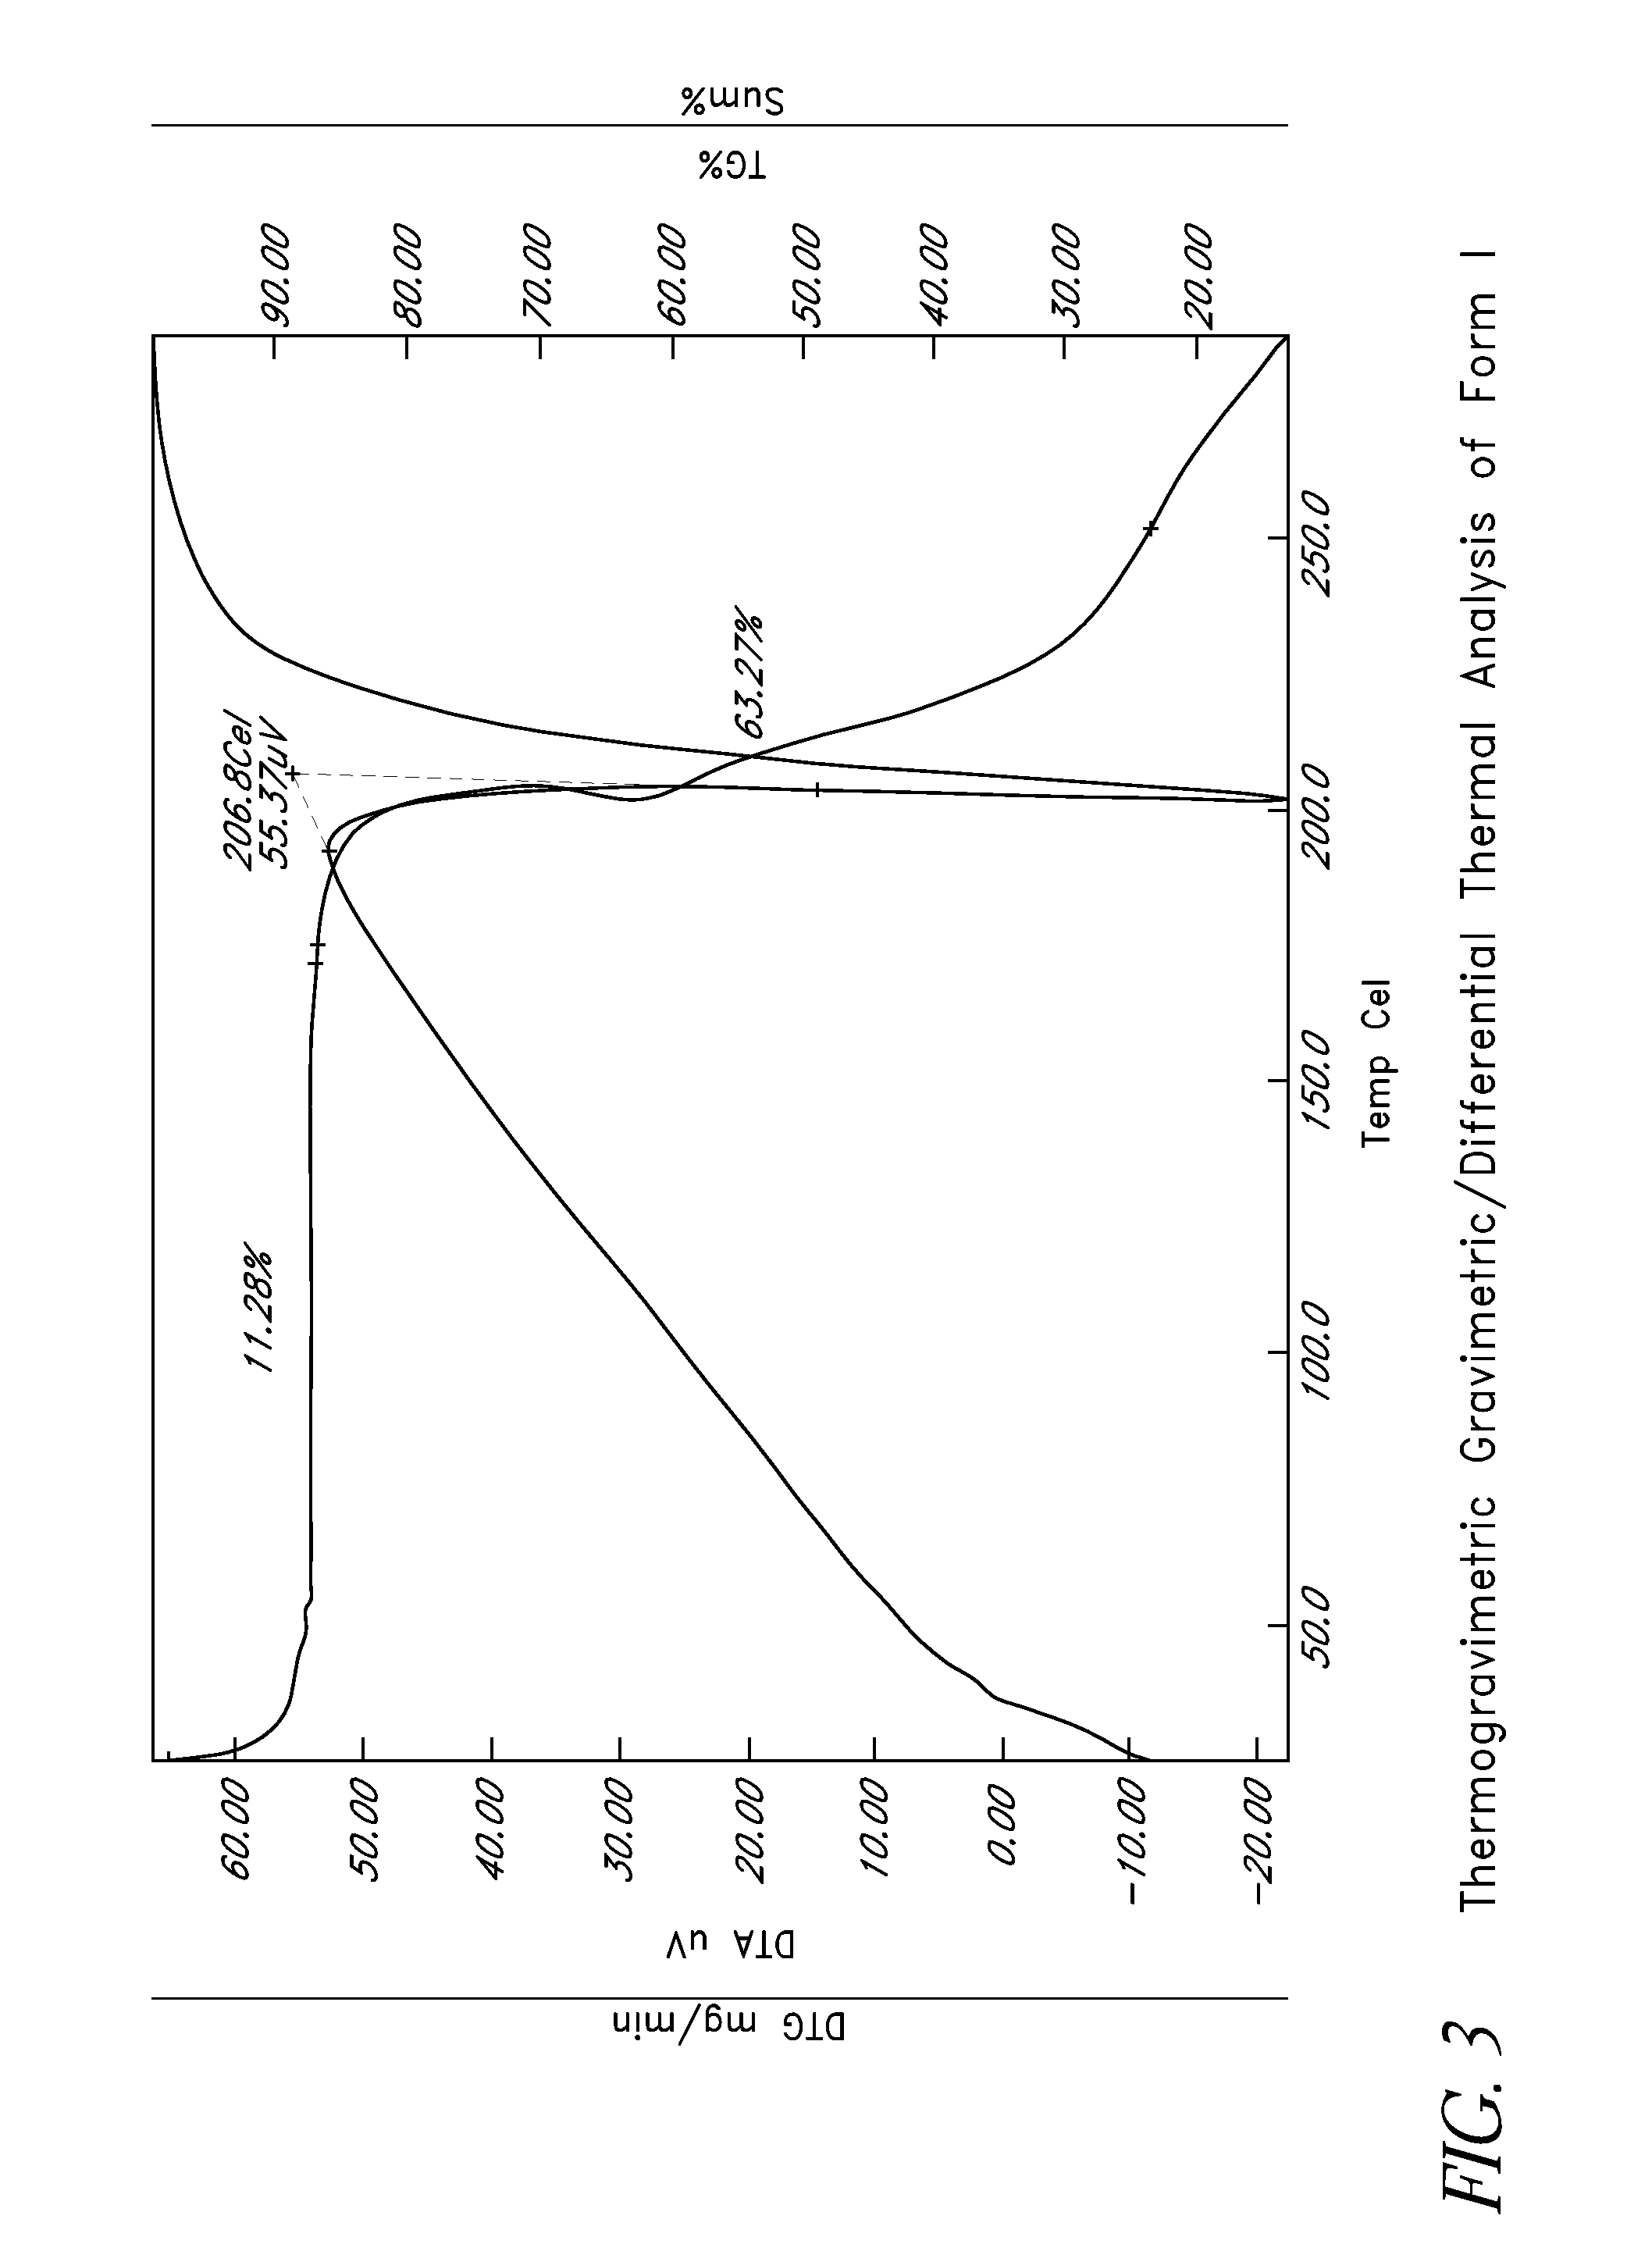 L-ornithine phenyl acetate and methods of making thereof